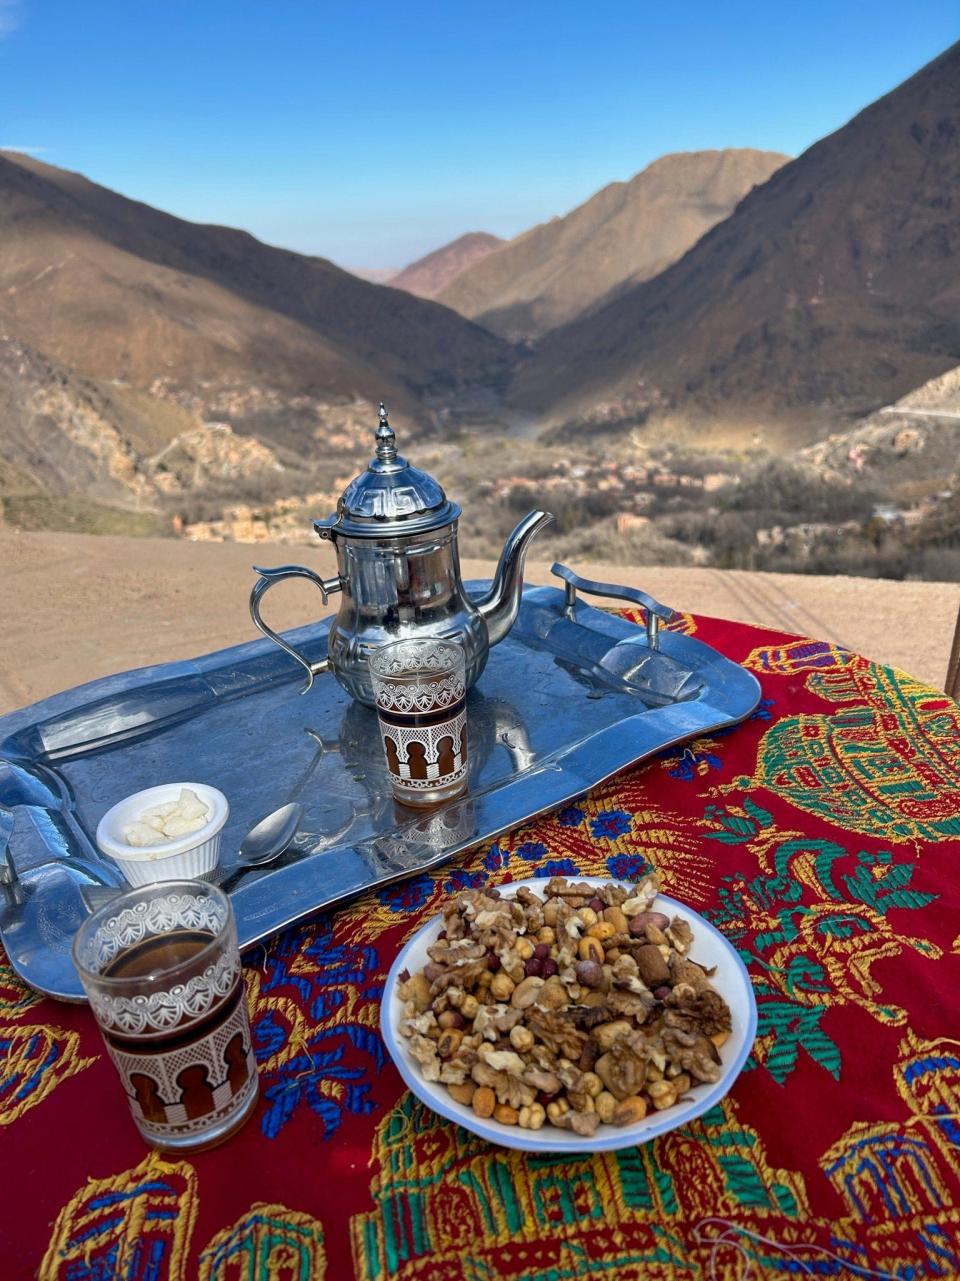 Traditional welcome fare in Morocco is shown here – mint tea and walnuts on a silver tray resting on a colorful tapestry. The drink is poured with ceremonial fanfare, holding the teapot spout high above the glasses.